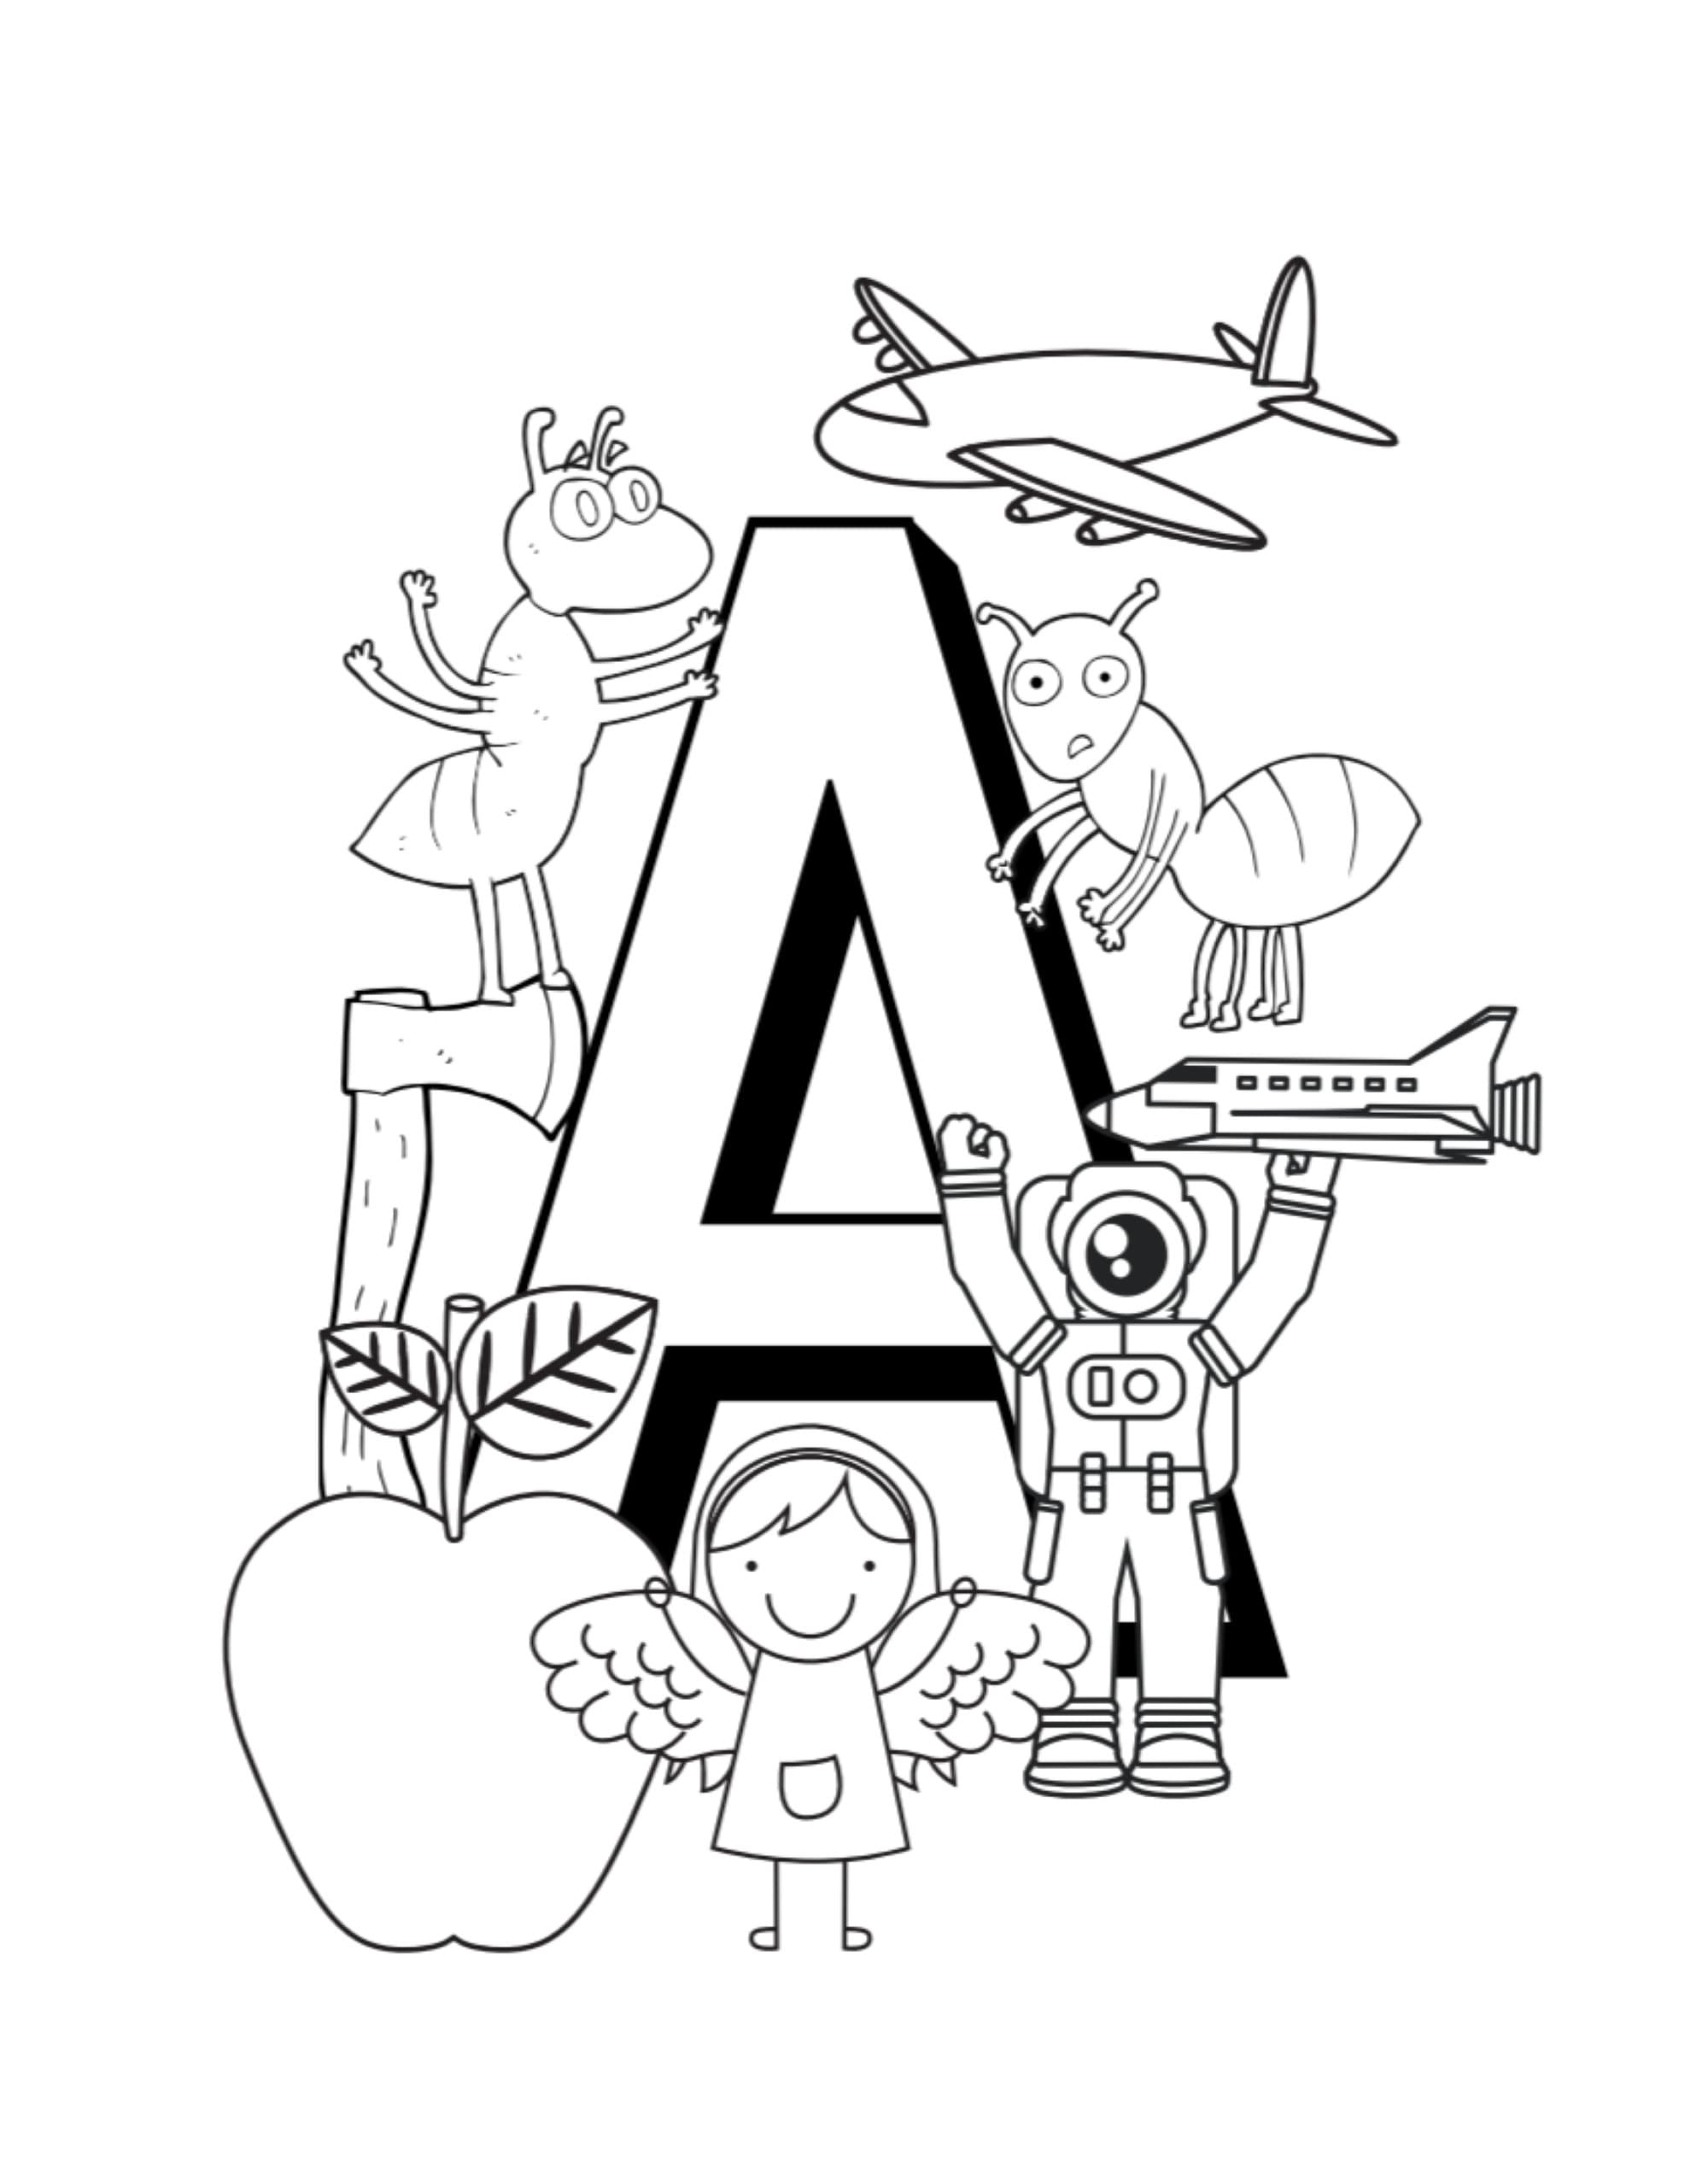 ABC Coloring Books for Toddlers EP.14: A to Z coloring sheets, JUMBO  Alphabet coloring pages for Preschoolers, ABC Coloring Sheets for kids ages  2-4, (Large Print / Paperback)